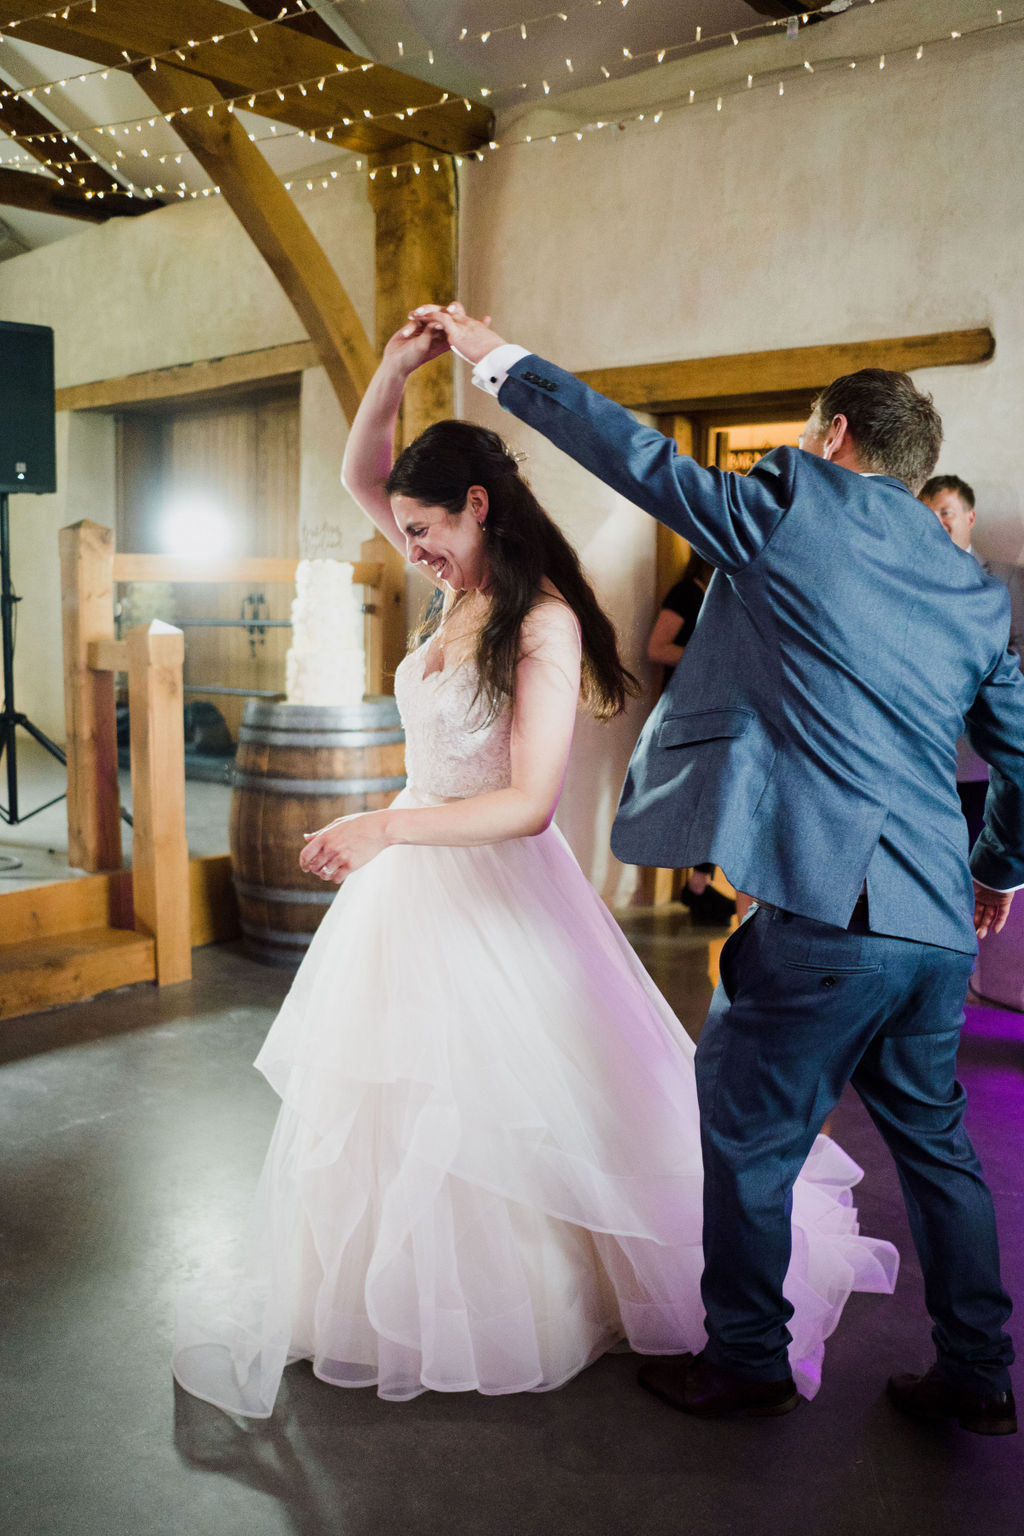 Upton Barn and Walled Gardens wedding, the bride and groom share a dance.